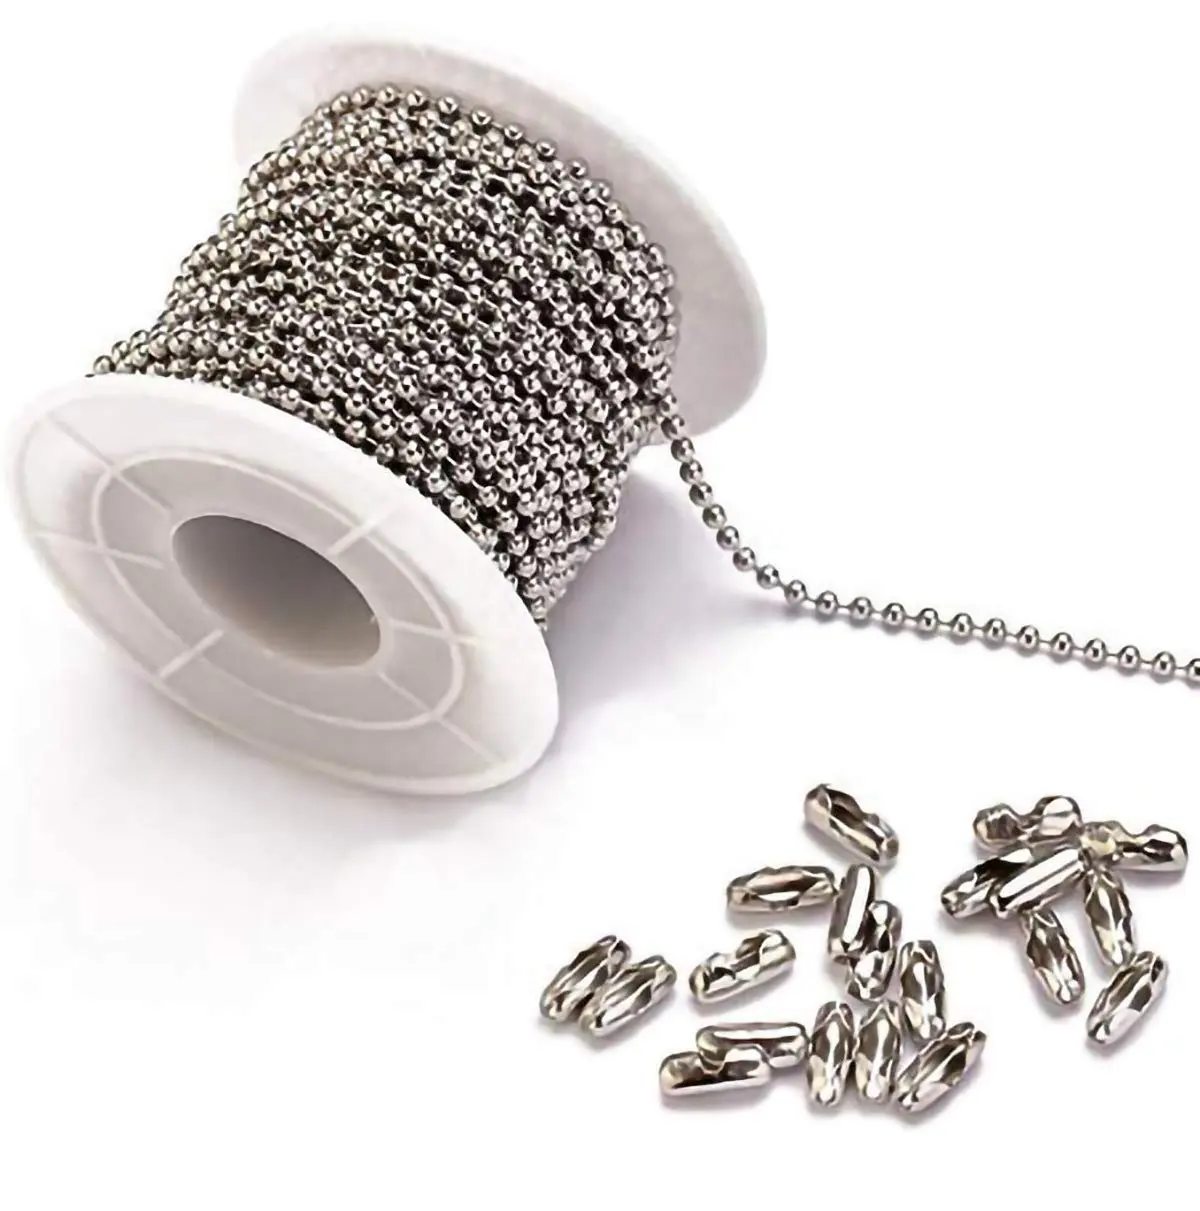 2.4mm to 12mm round bead metal roll ball chain connectors roller blinds stainless steel ball chain